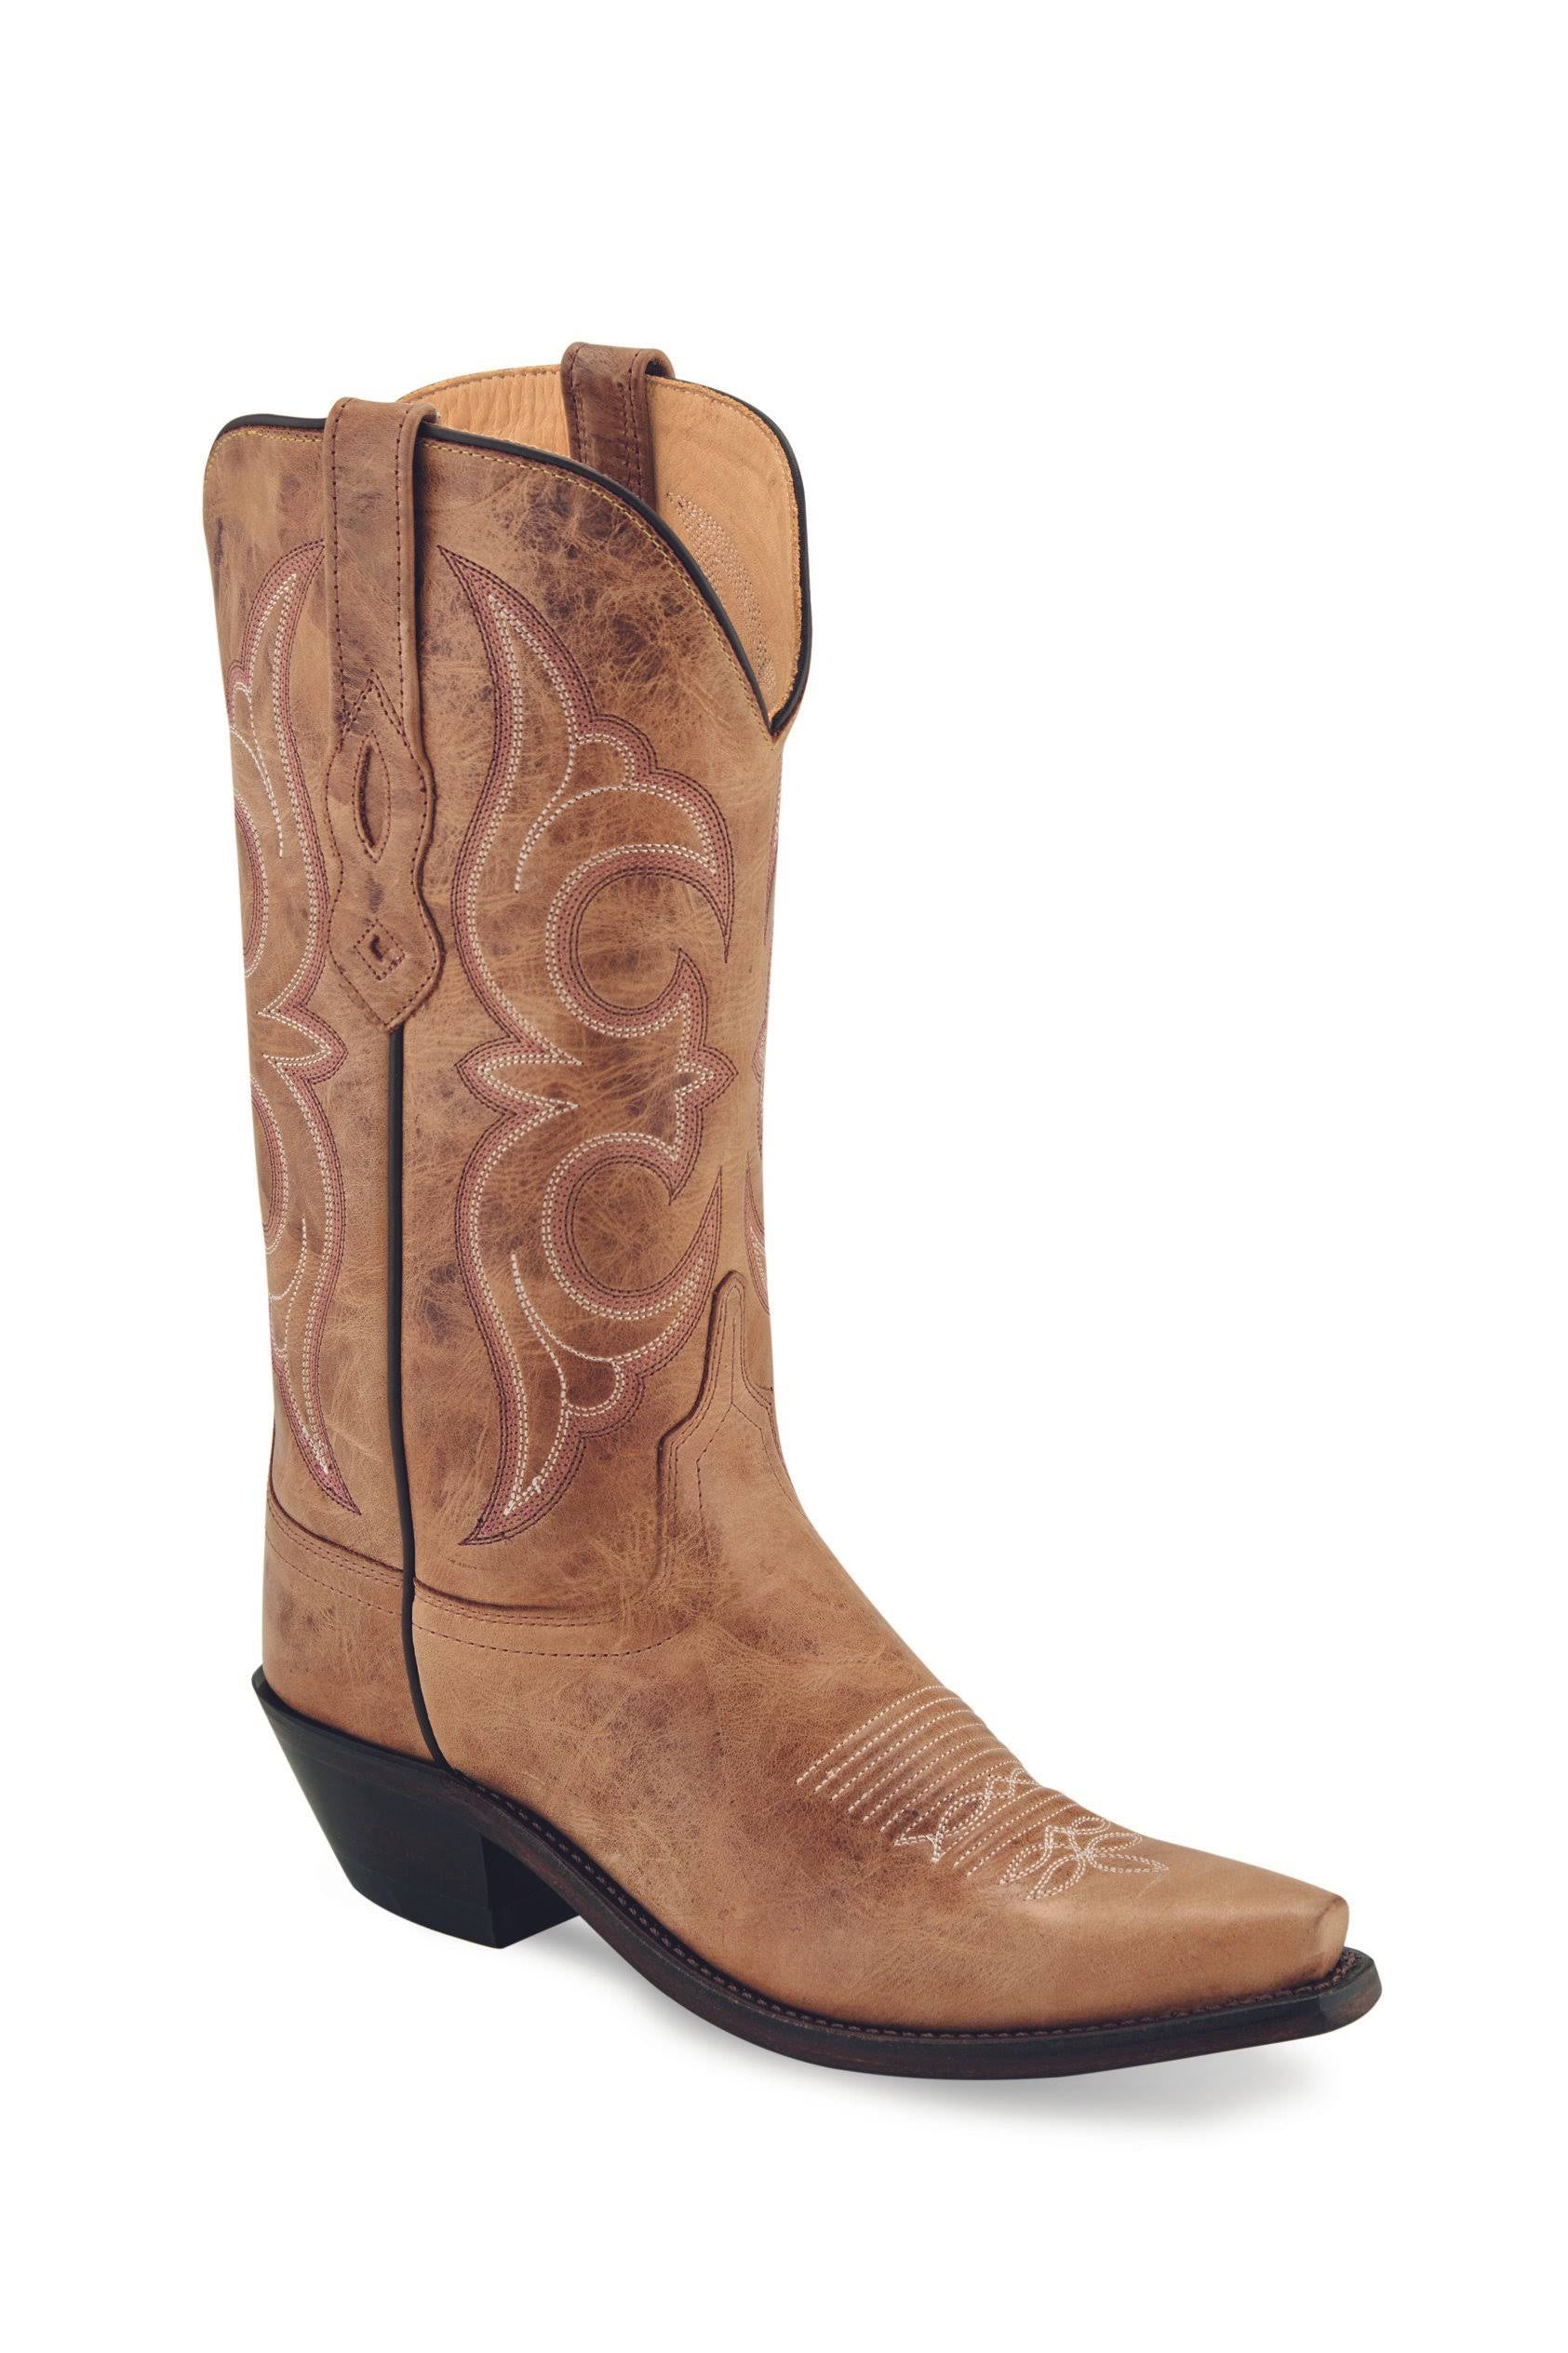 Old West Women's Distressed Brown Snip Toe Western Boots